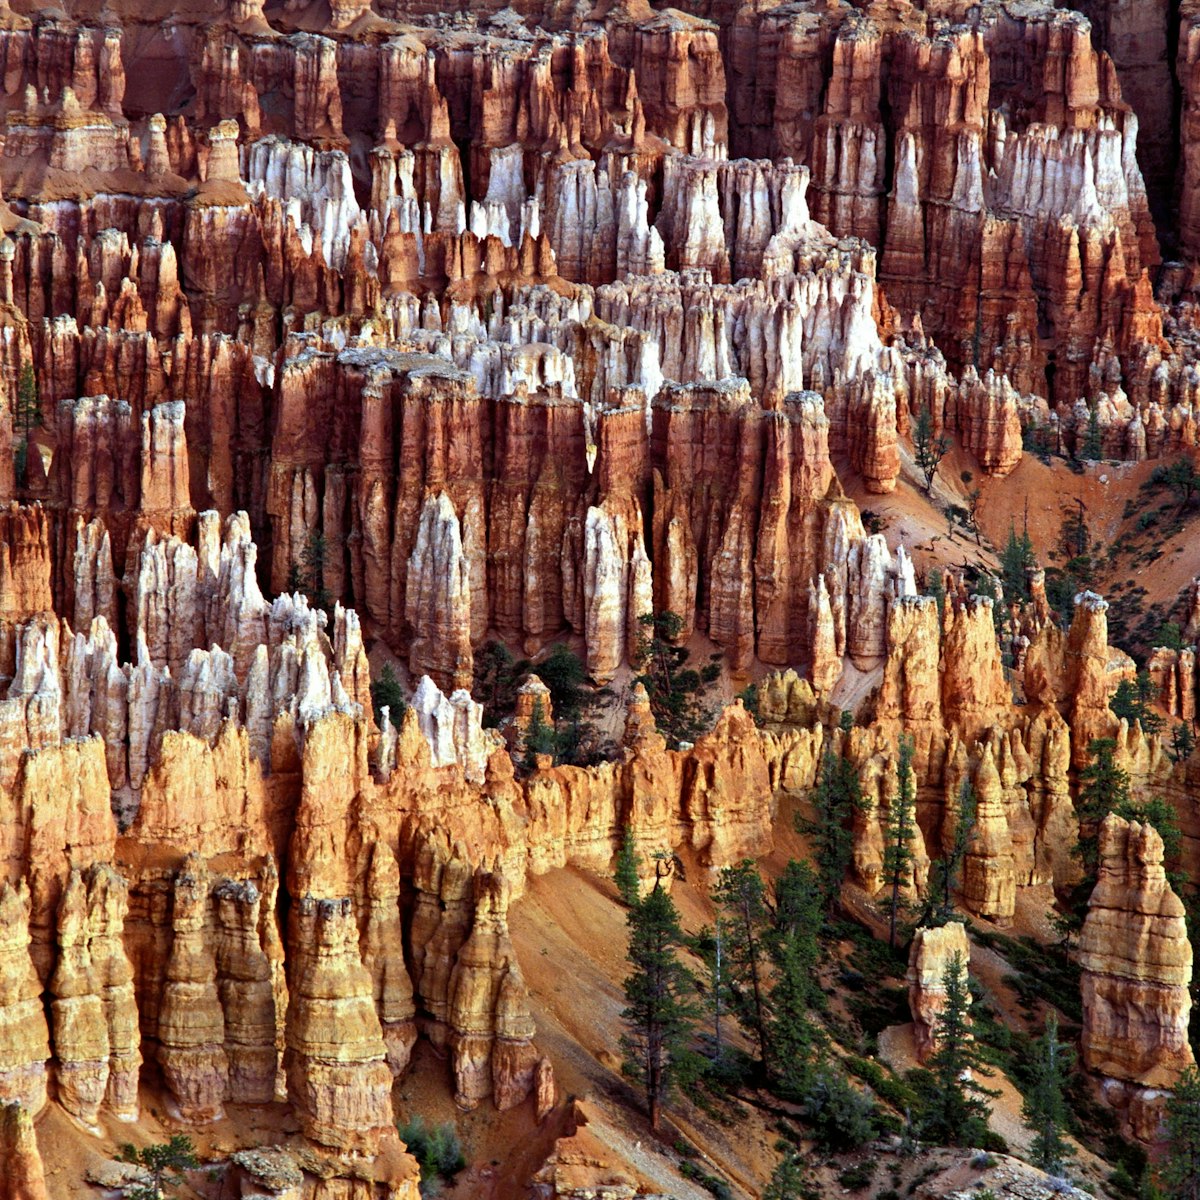 HOODOS, PINNACLES AND SPORES, DIFFERENTIAL EROSION. LIMESTONE SEDIMENTARY ROCK. BRYCE CANYON, UTAH. BRYCE POINT